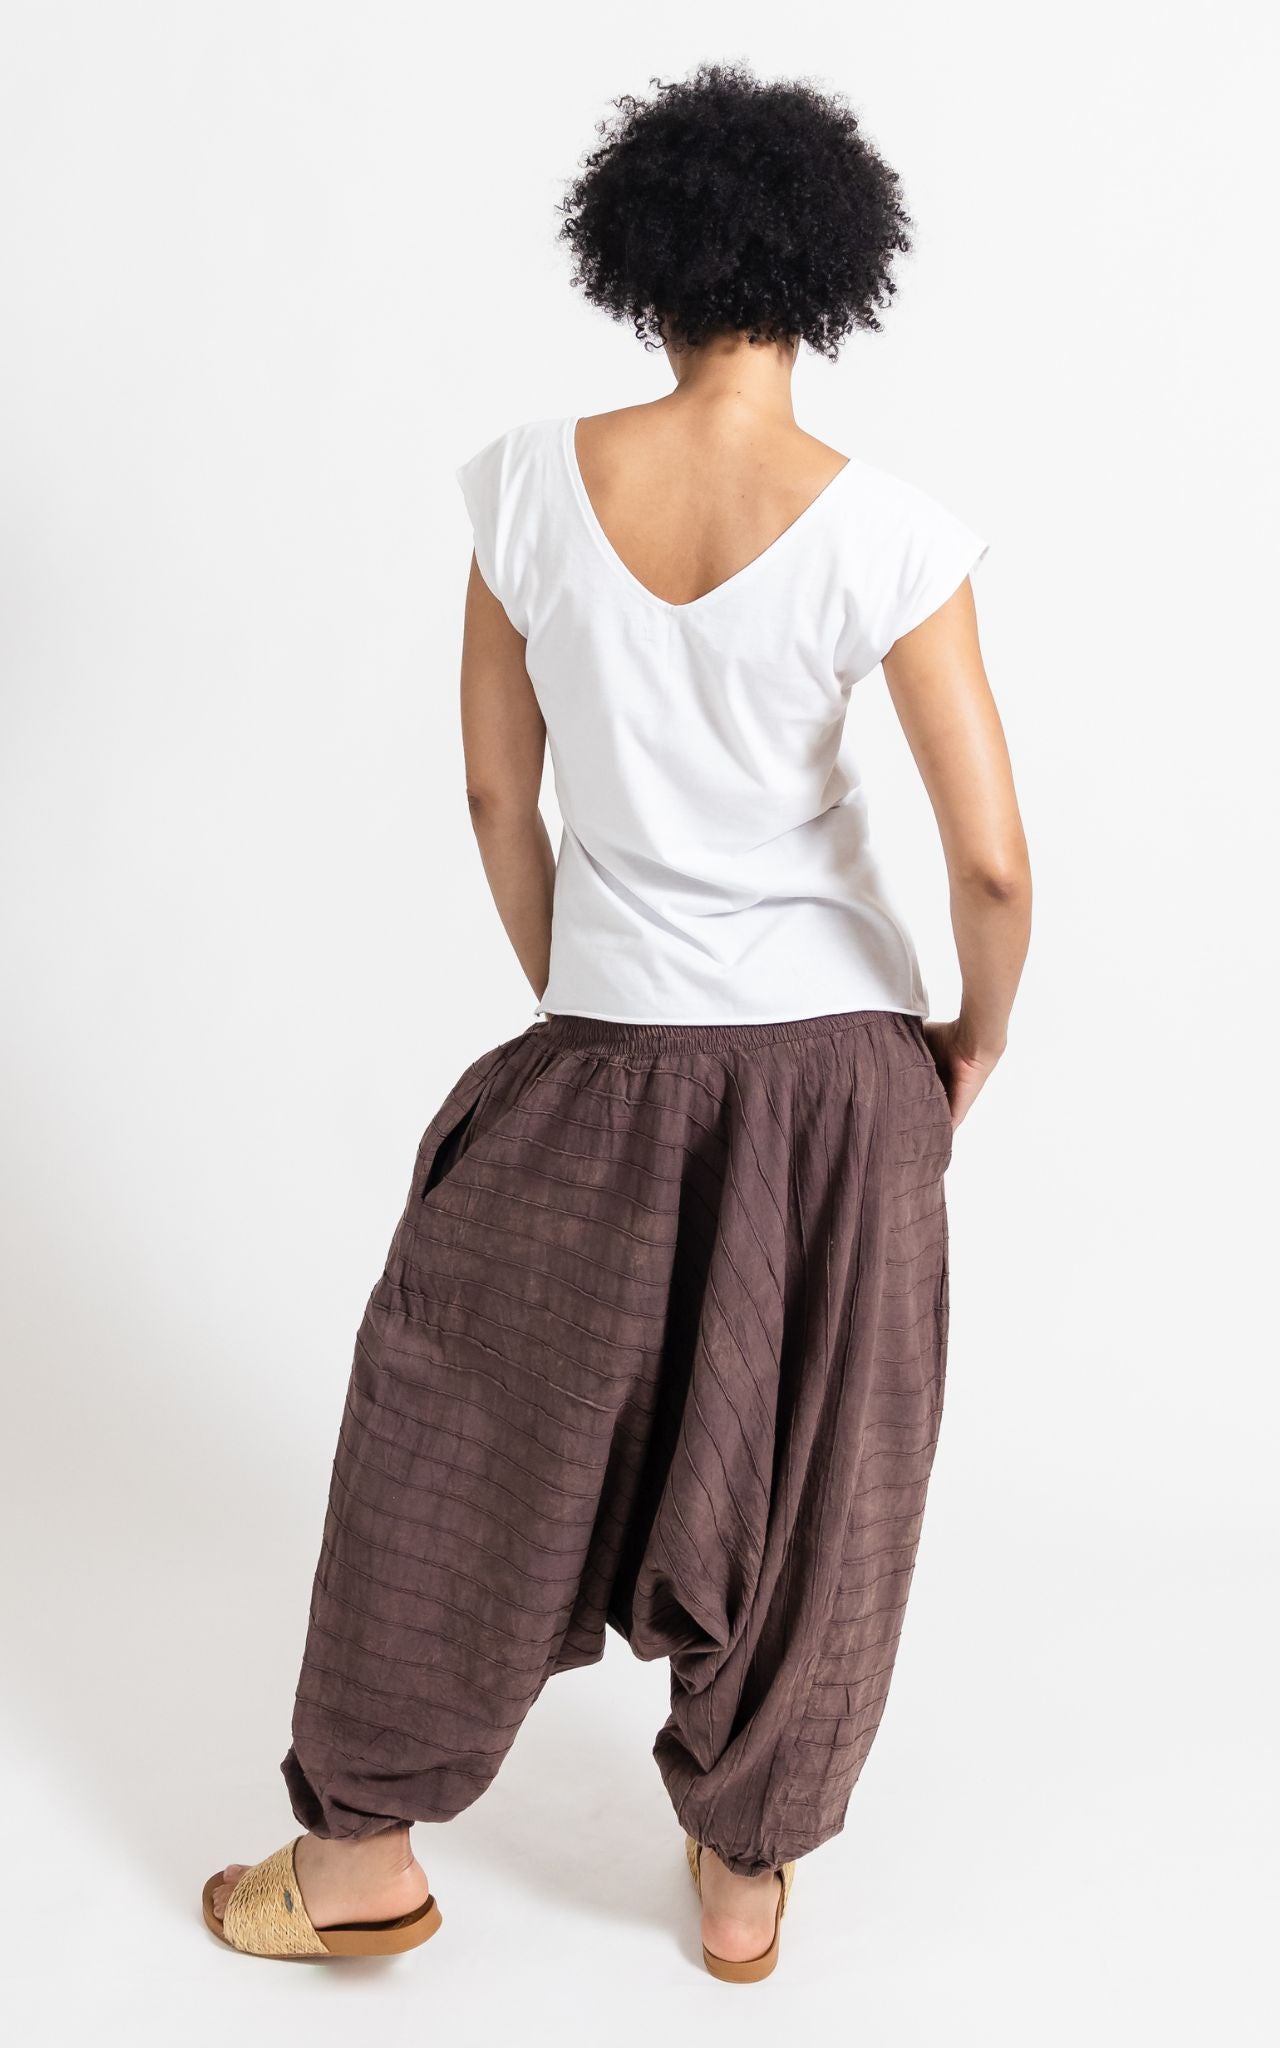 Surya Australia Ethical Cotton Low Crotch Harem Style Pants made in Nepal - Chocolate